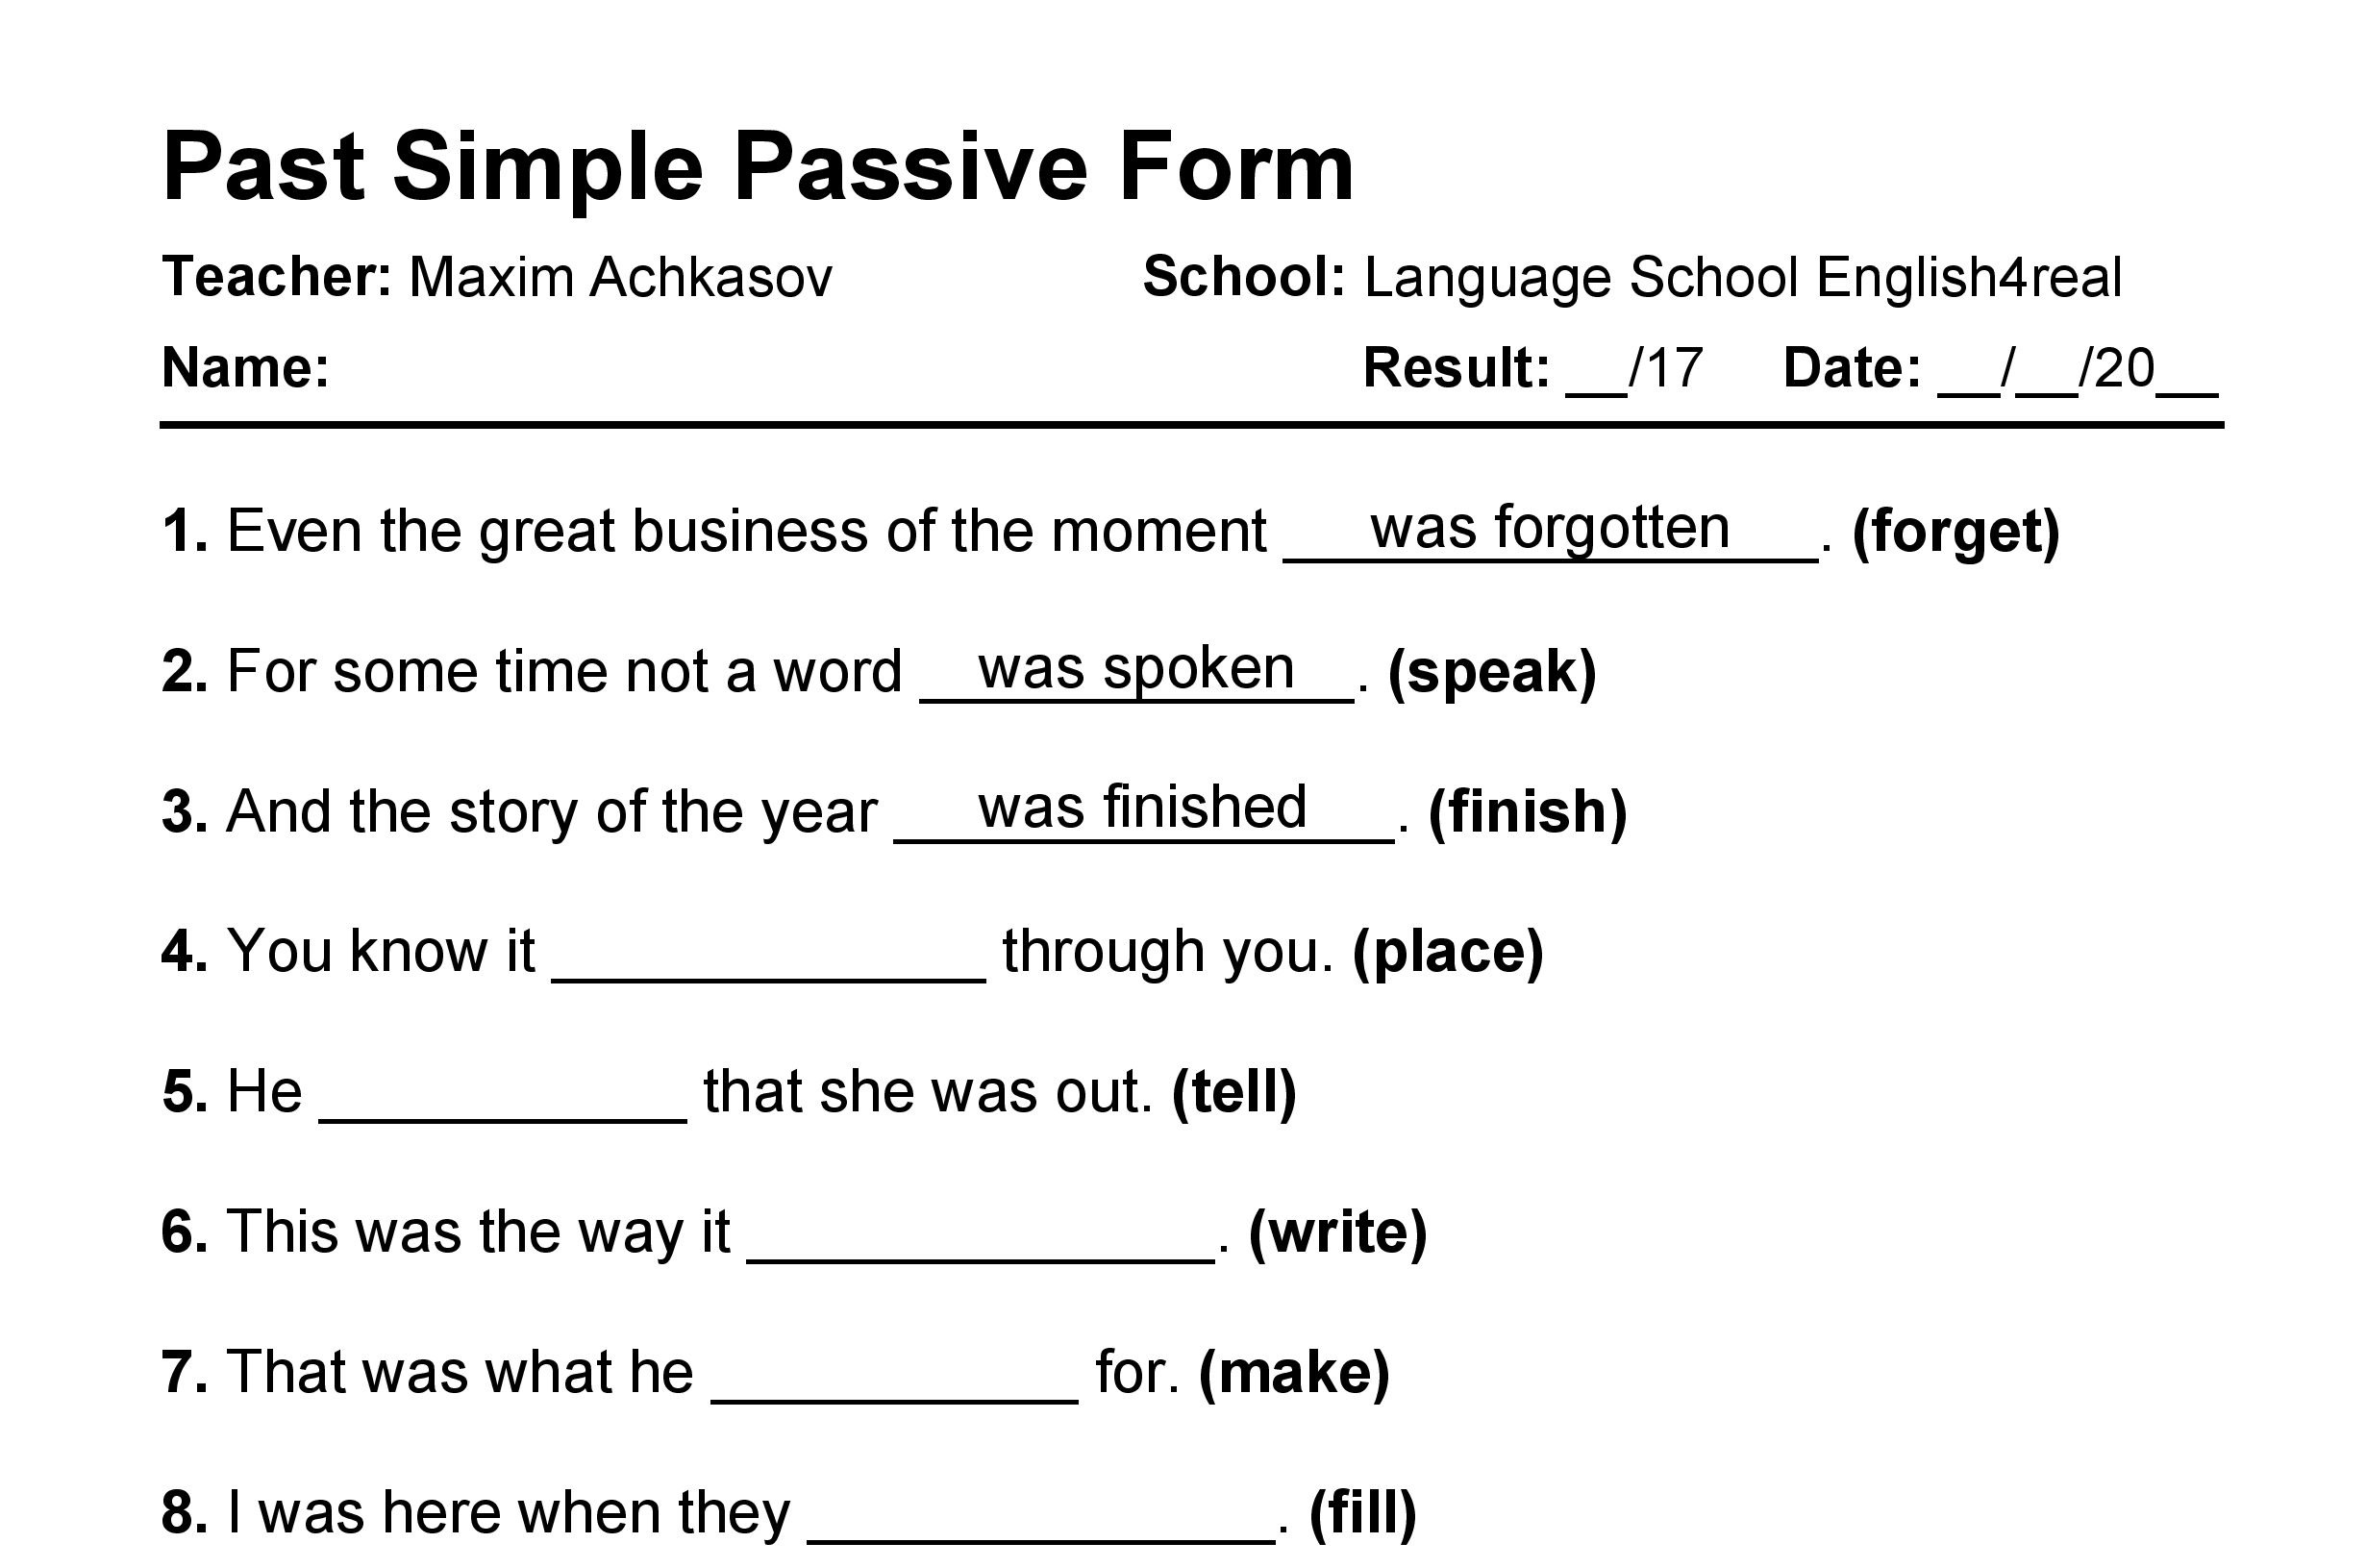 Past Simple Passive English Grammar Fill In The Blanks Exercises With Answers In PDF